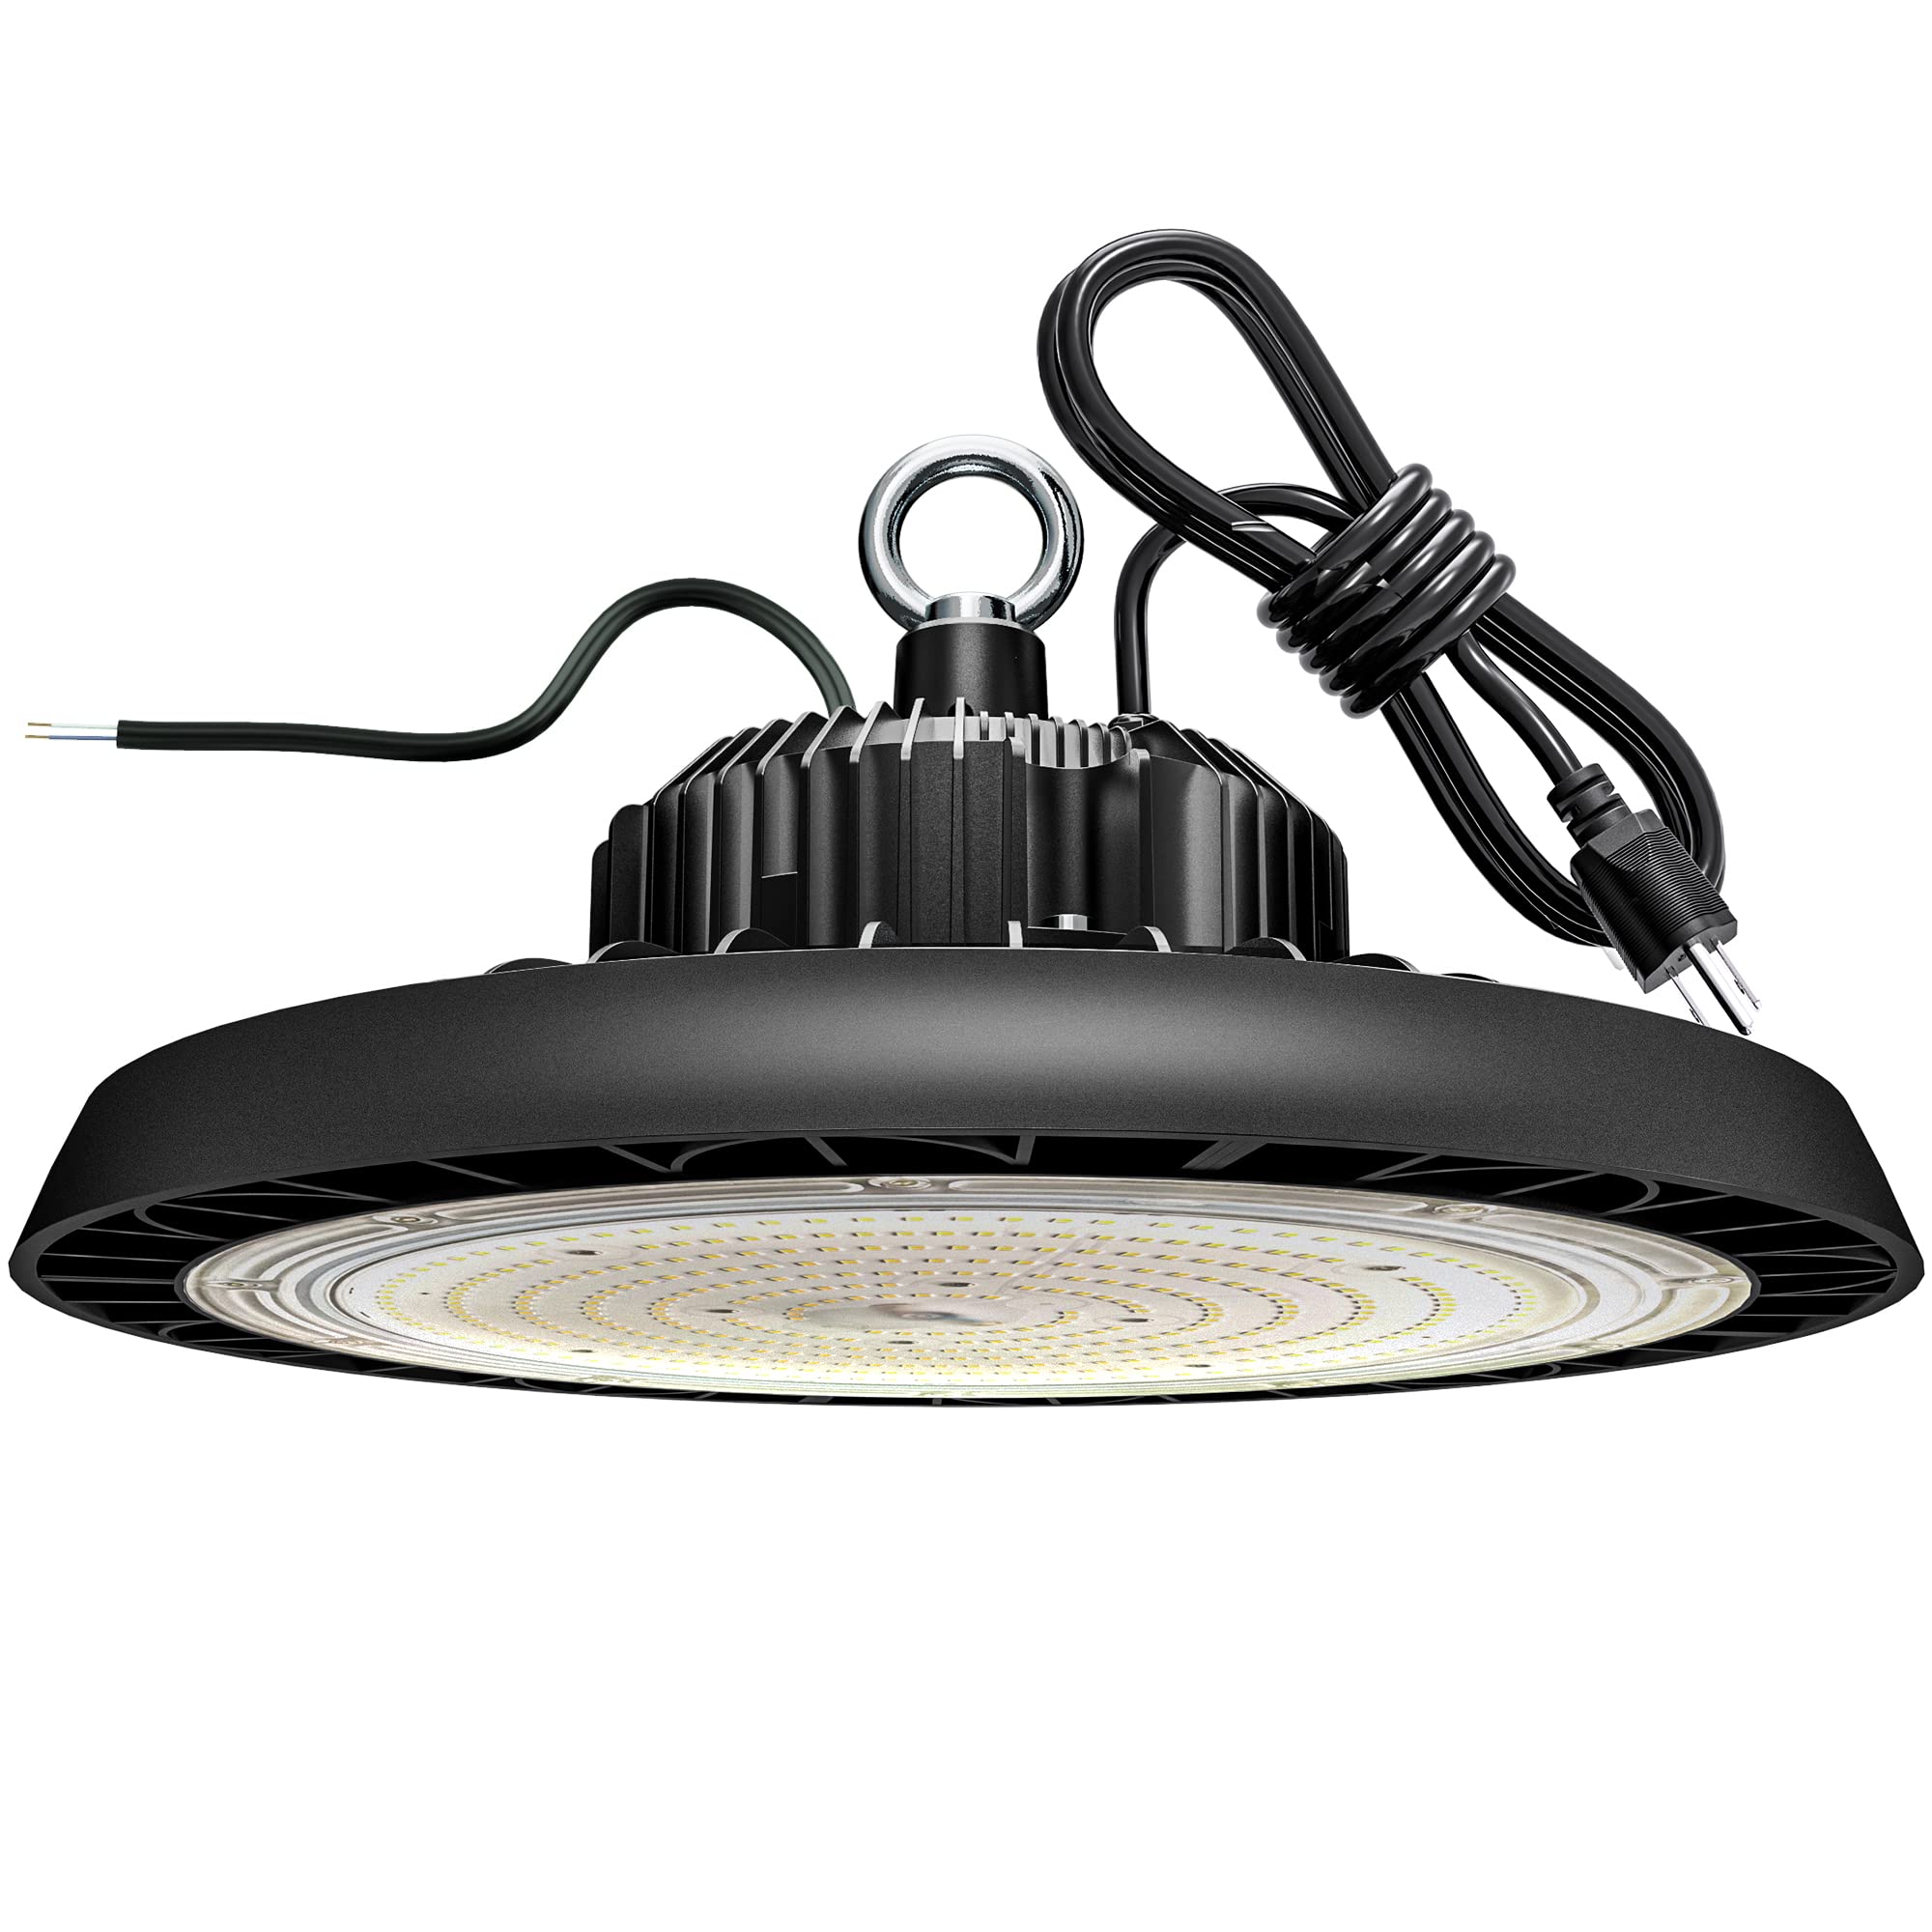 Flakeeper Led High Bay Light 240W 36000 Lm With Us Plug, 5000K, Dimmable 1-10V, Ip65 Waterproof, Flakeeper Ufo Commercial Industri